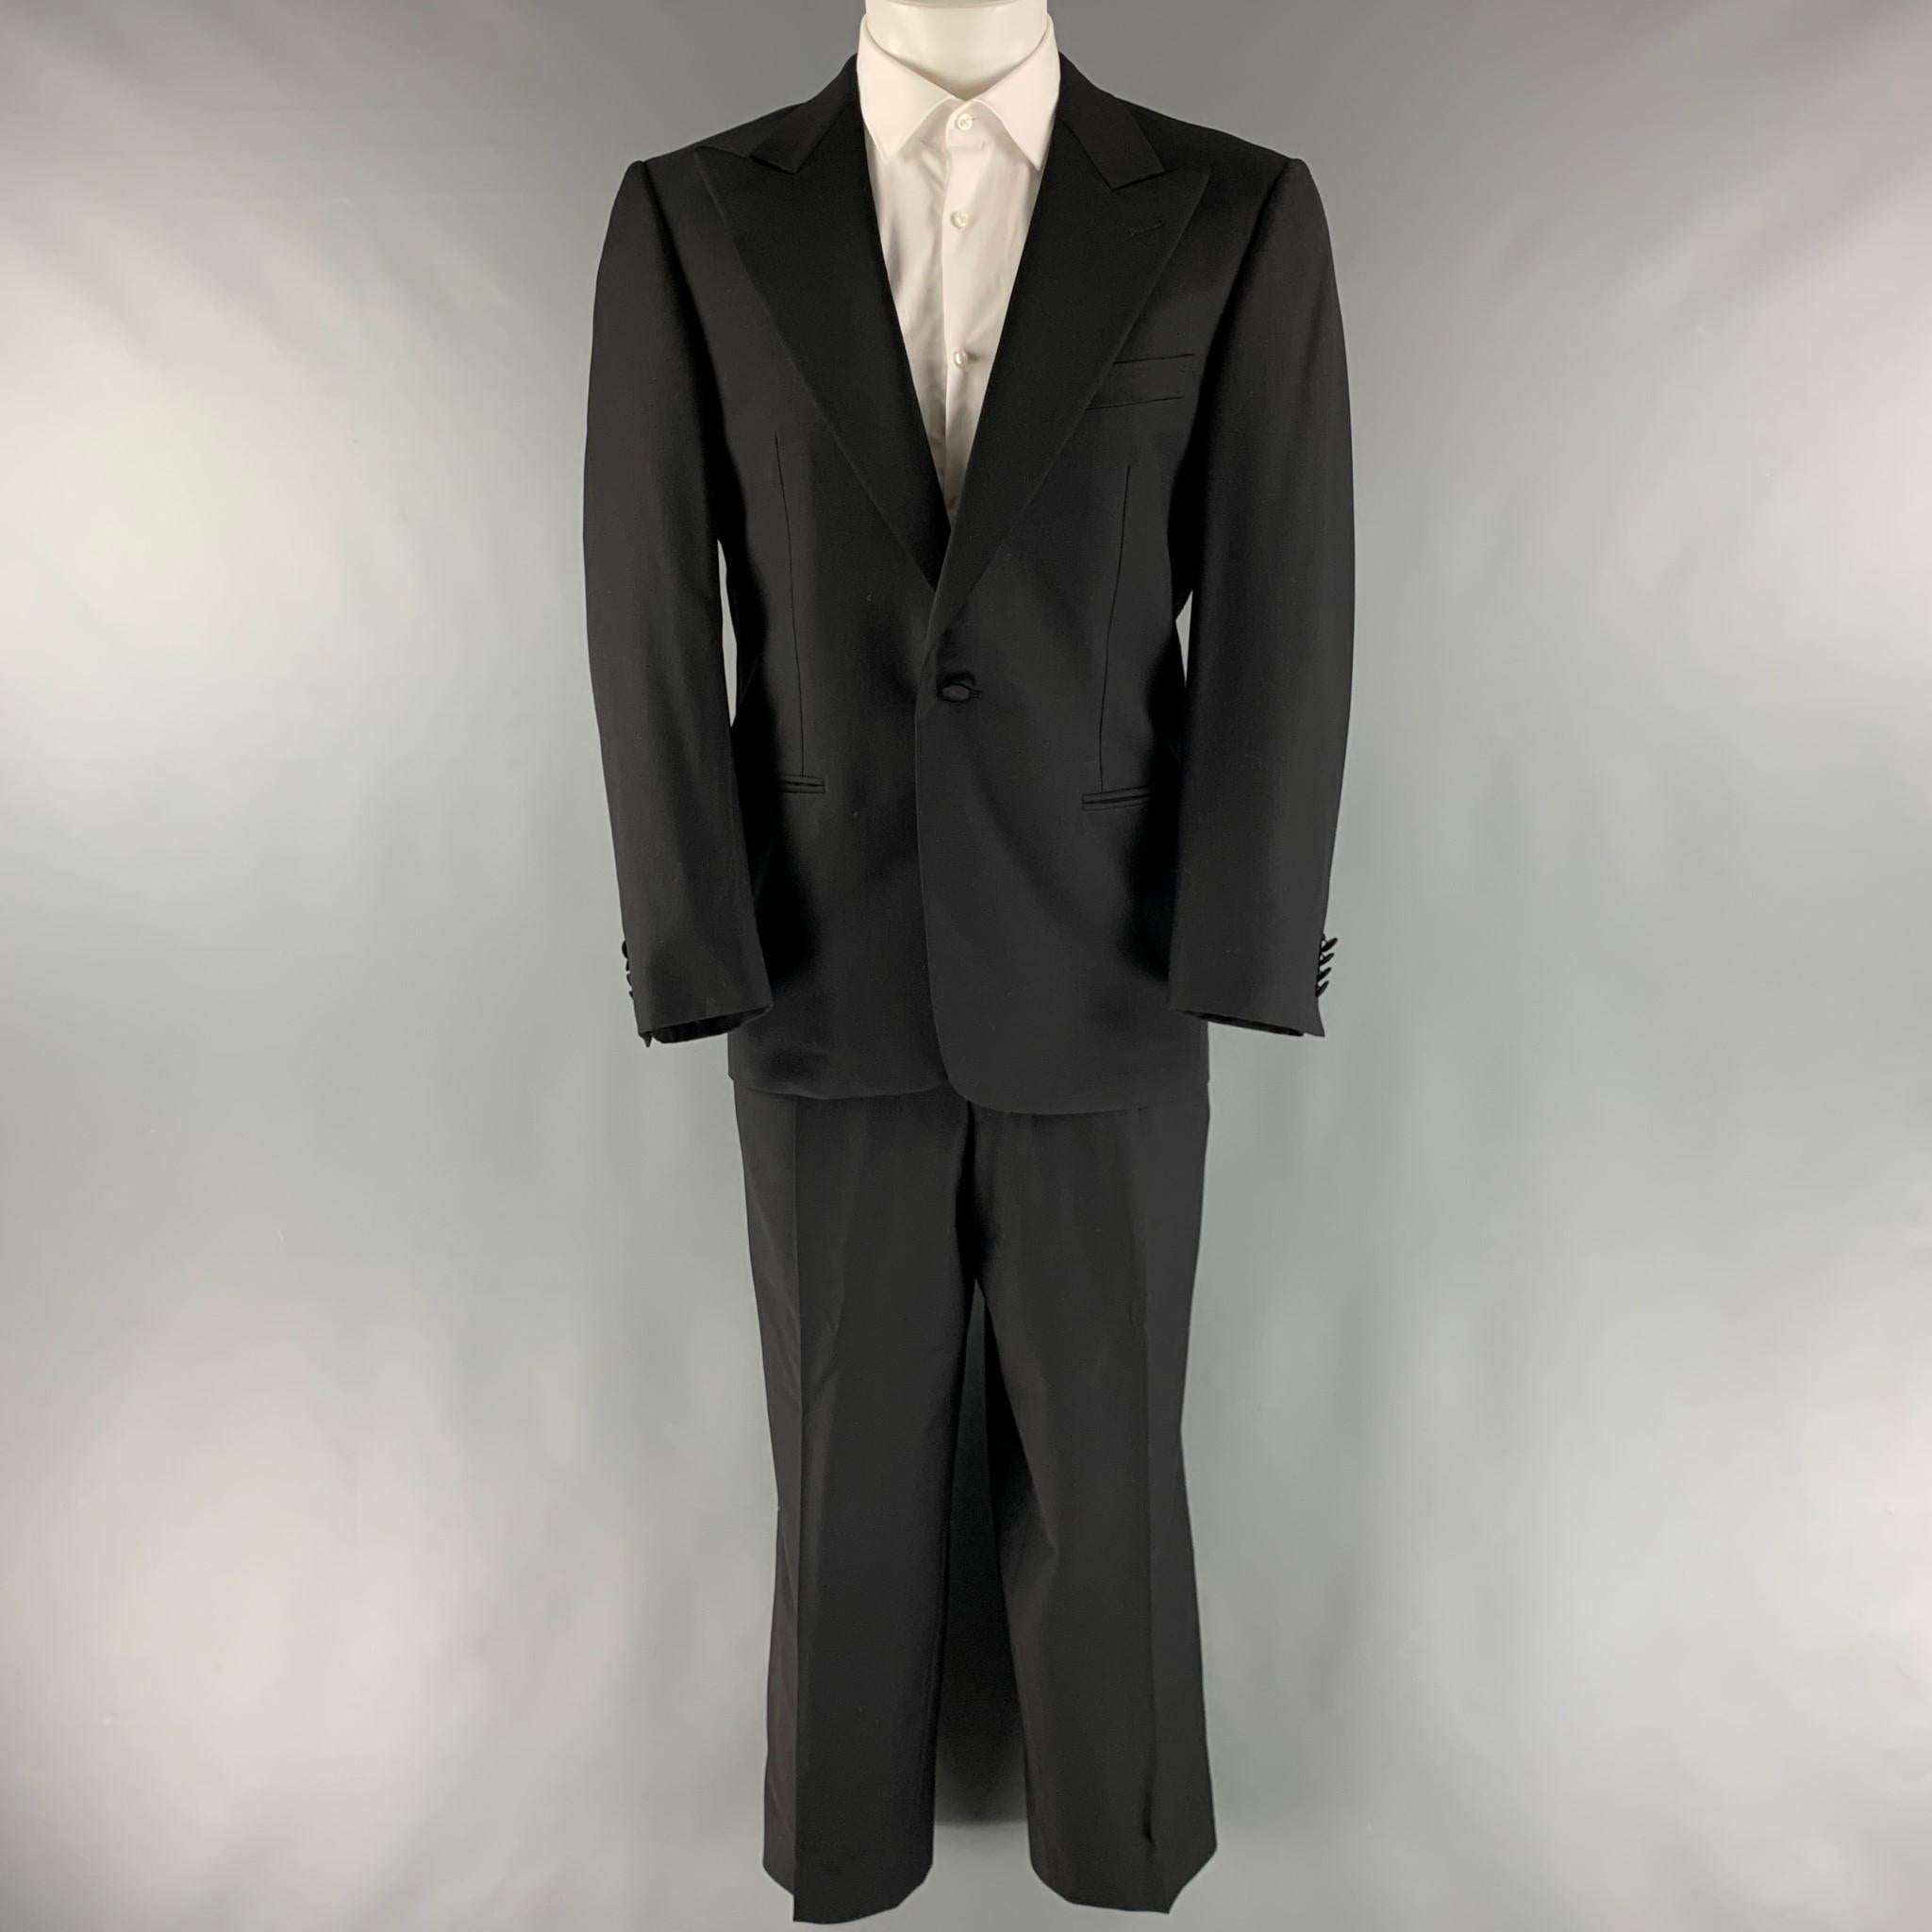 ERMENEGILDO ZEGNA for Neiman Marcus tuxedo comes in a black wool with a full liner and includes a single breasted, single button sport coat with a peak lapel and matching pleated front trousers. Made in Switzerland.

Excellent Pre-Owned